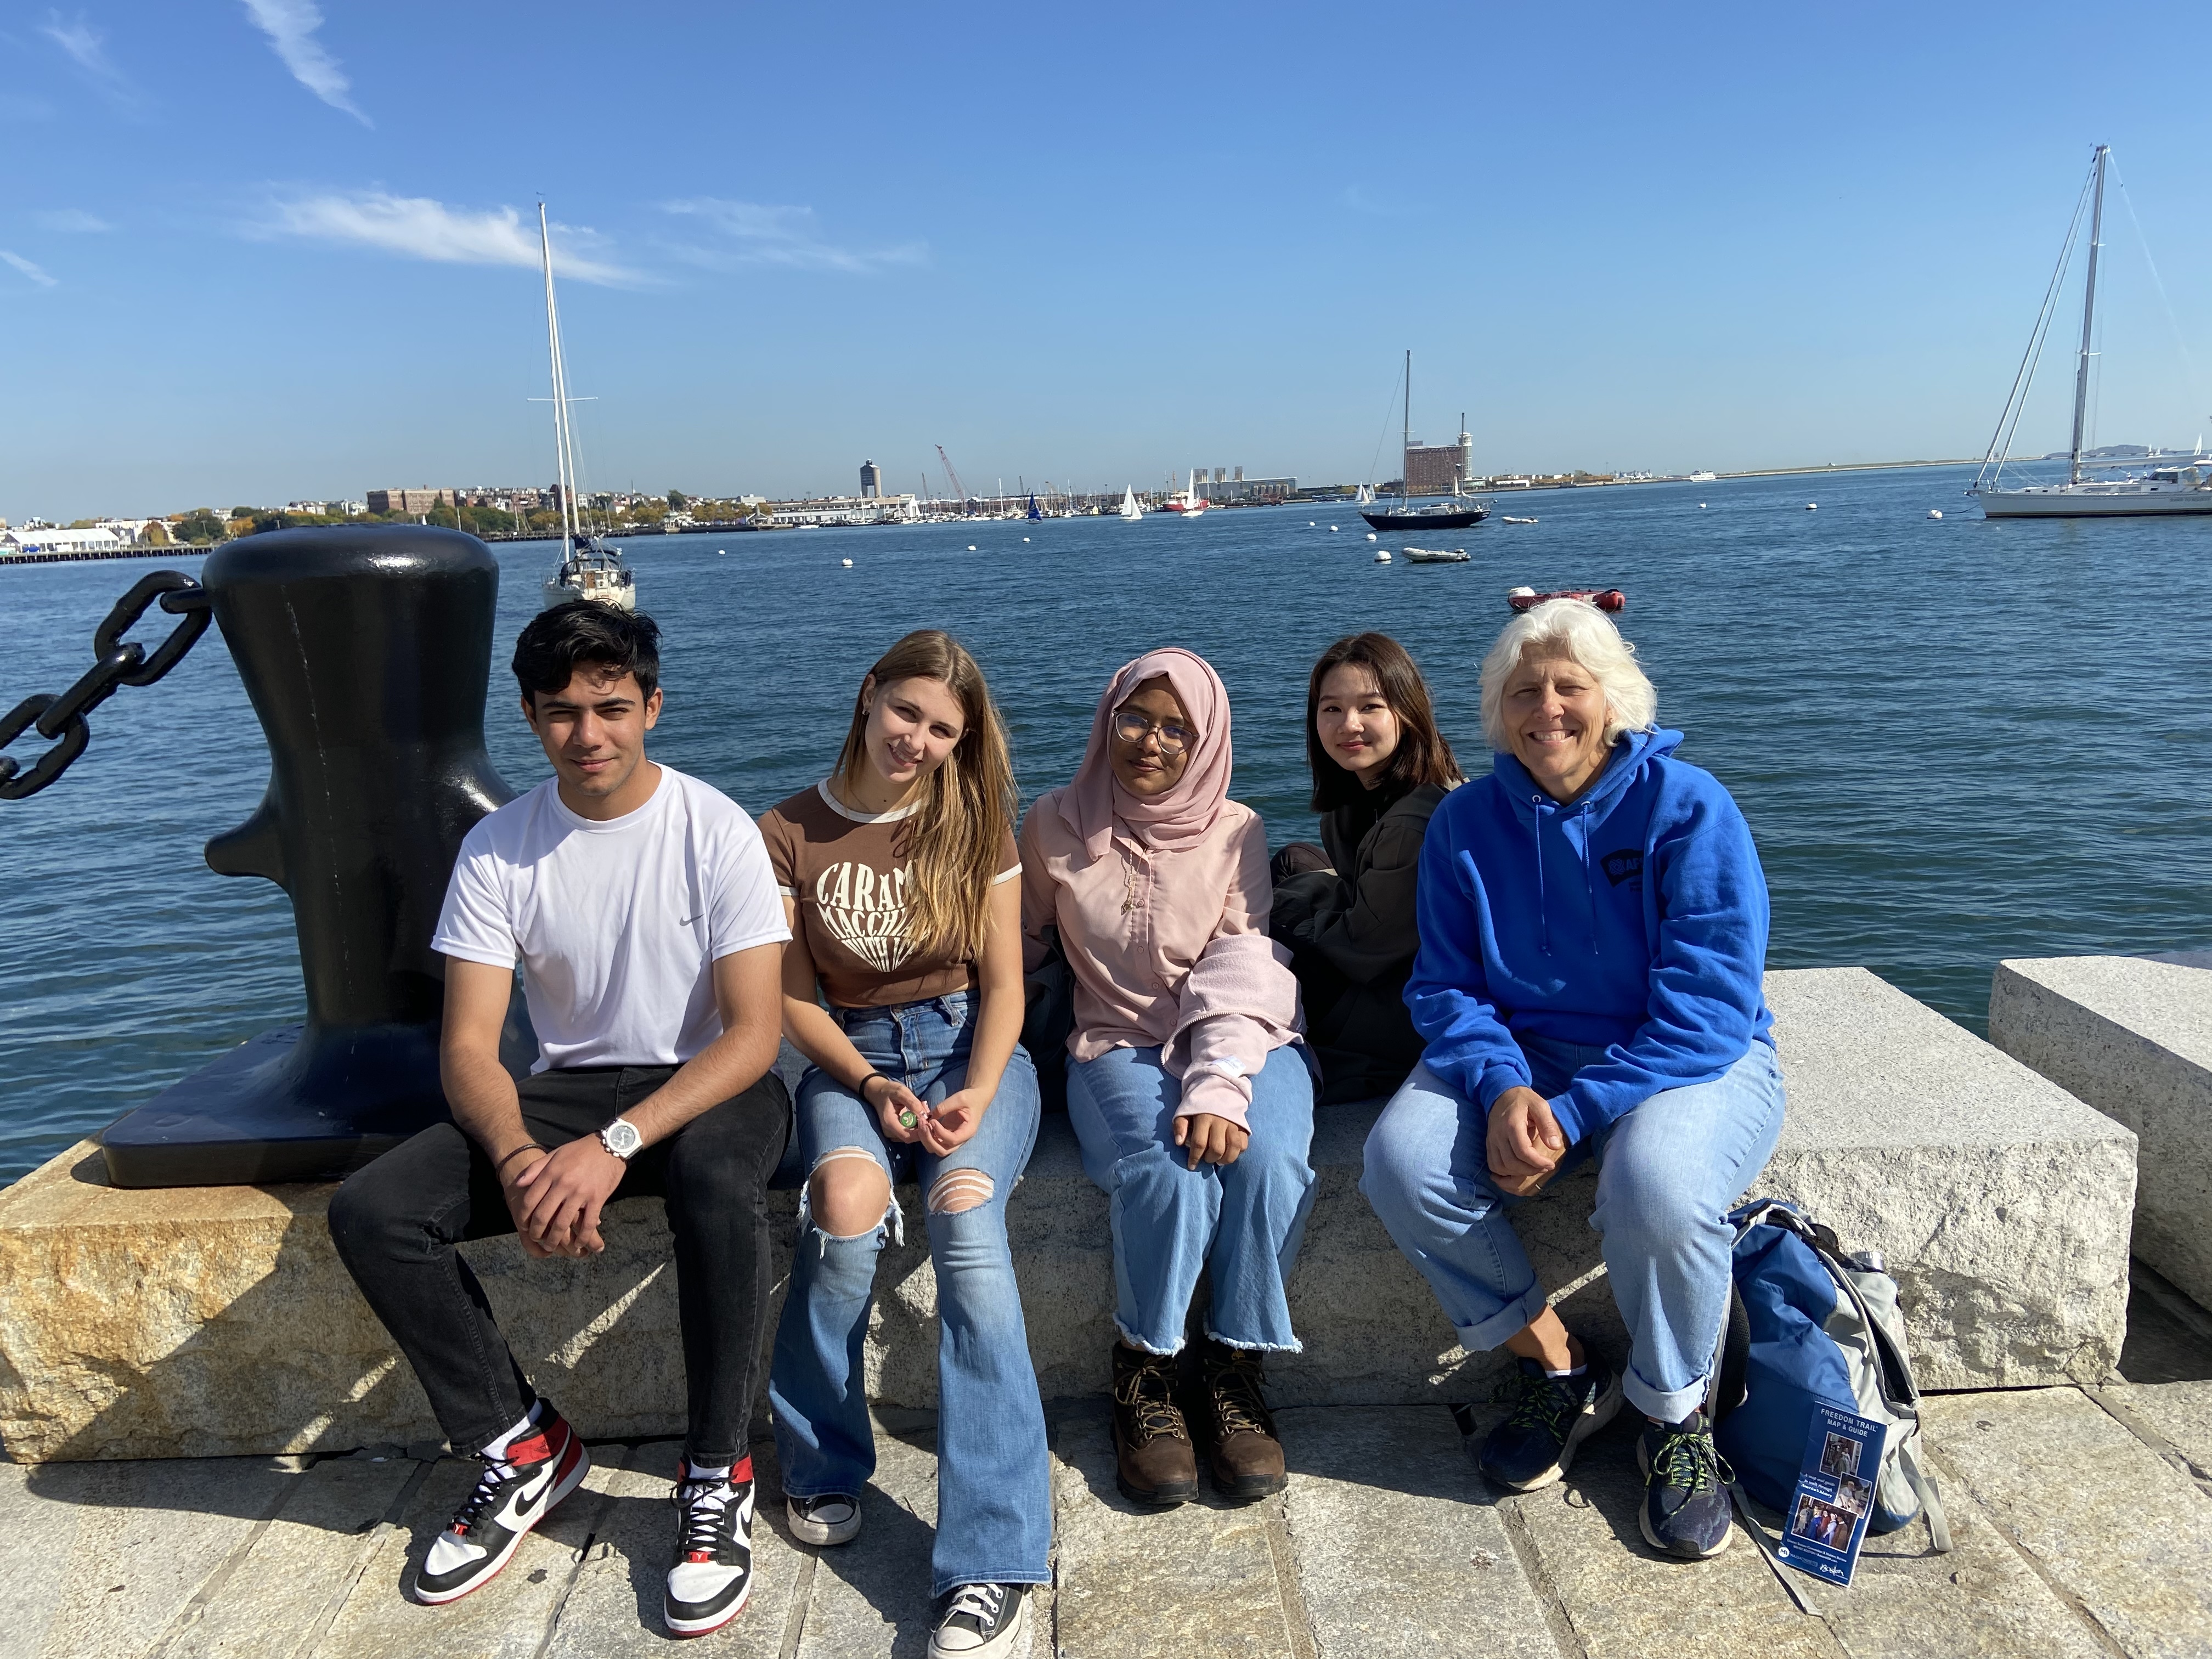 Muhammad smiling with friends on a dock at Boston Harbor